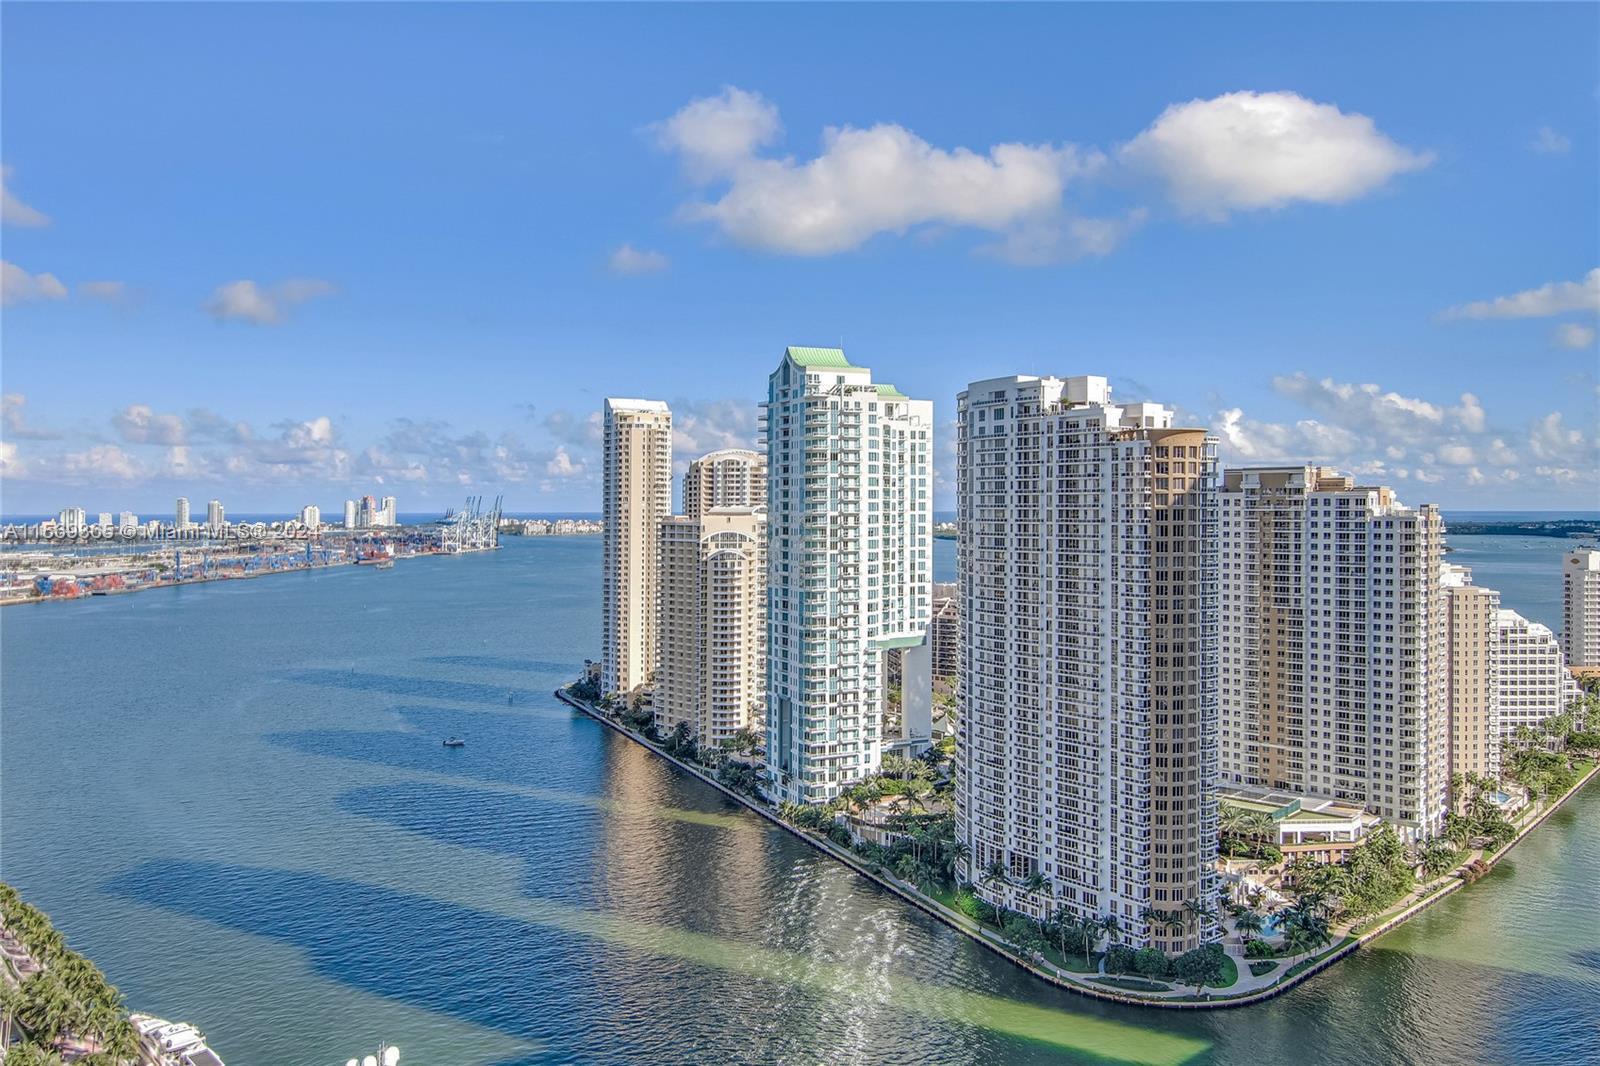 One of the best condo buildings on Brickell Key with water and city views. The unit has high ceiling